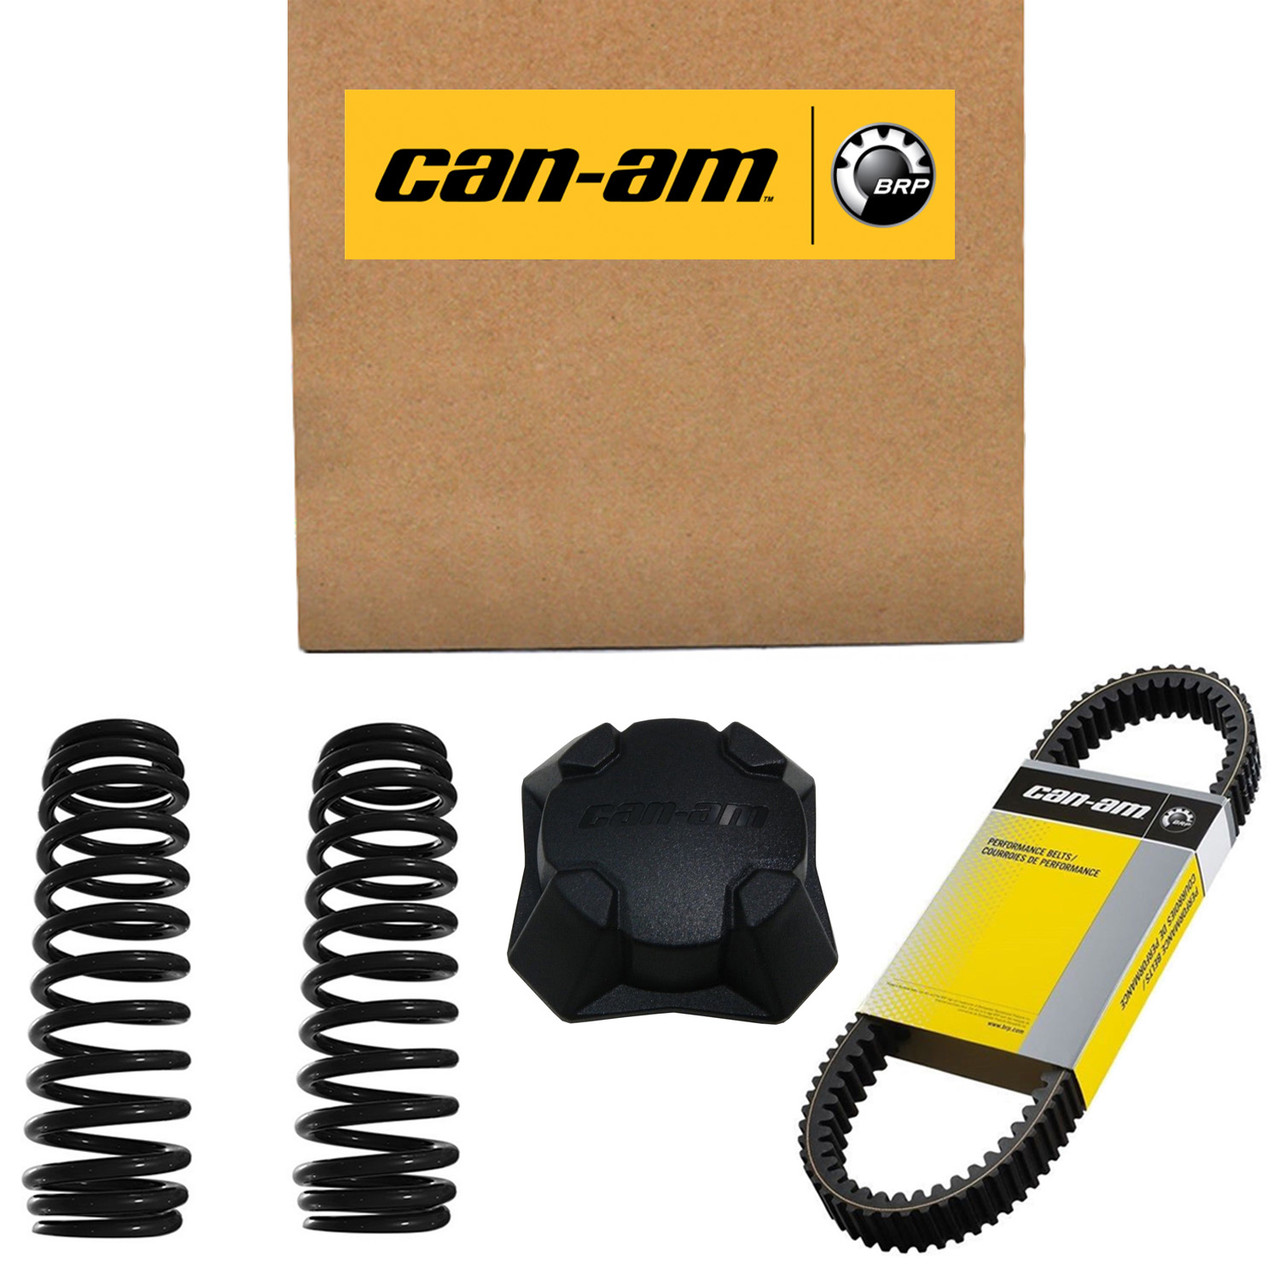 Can-Am New OEM Reflective Sheet, S80111RCA000